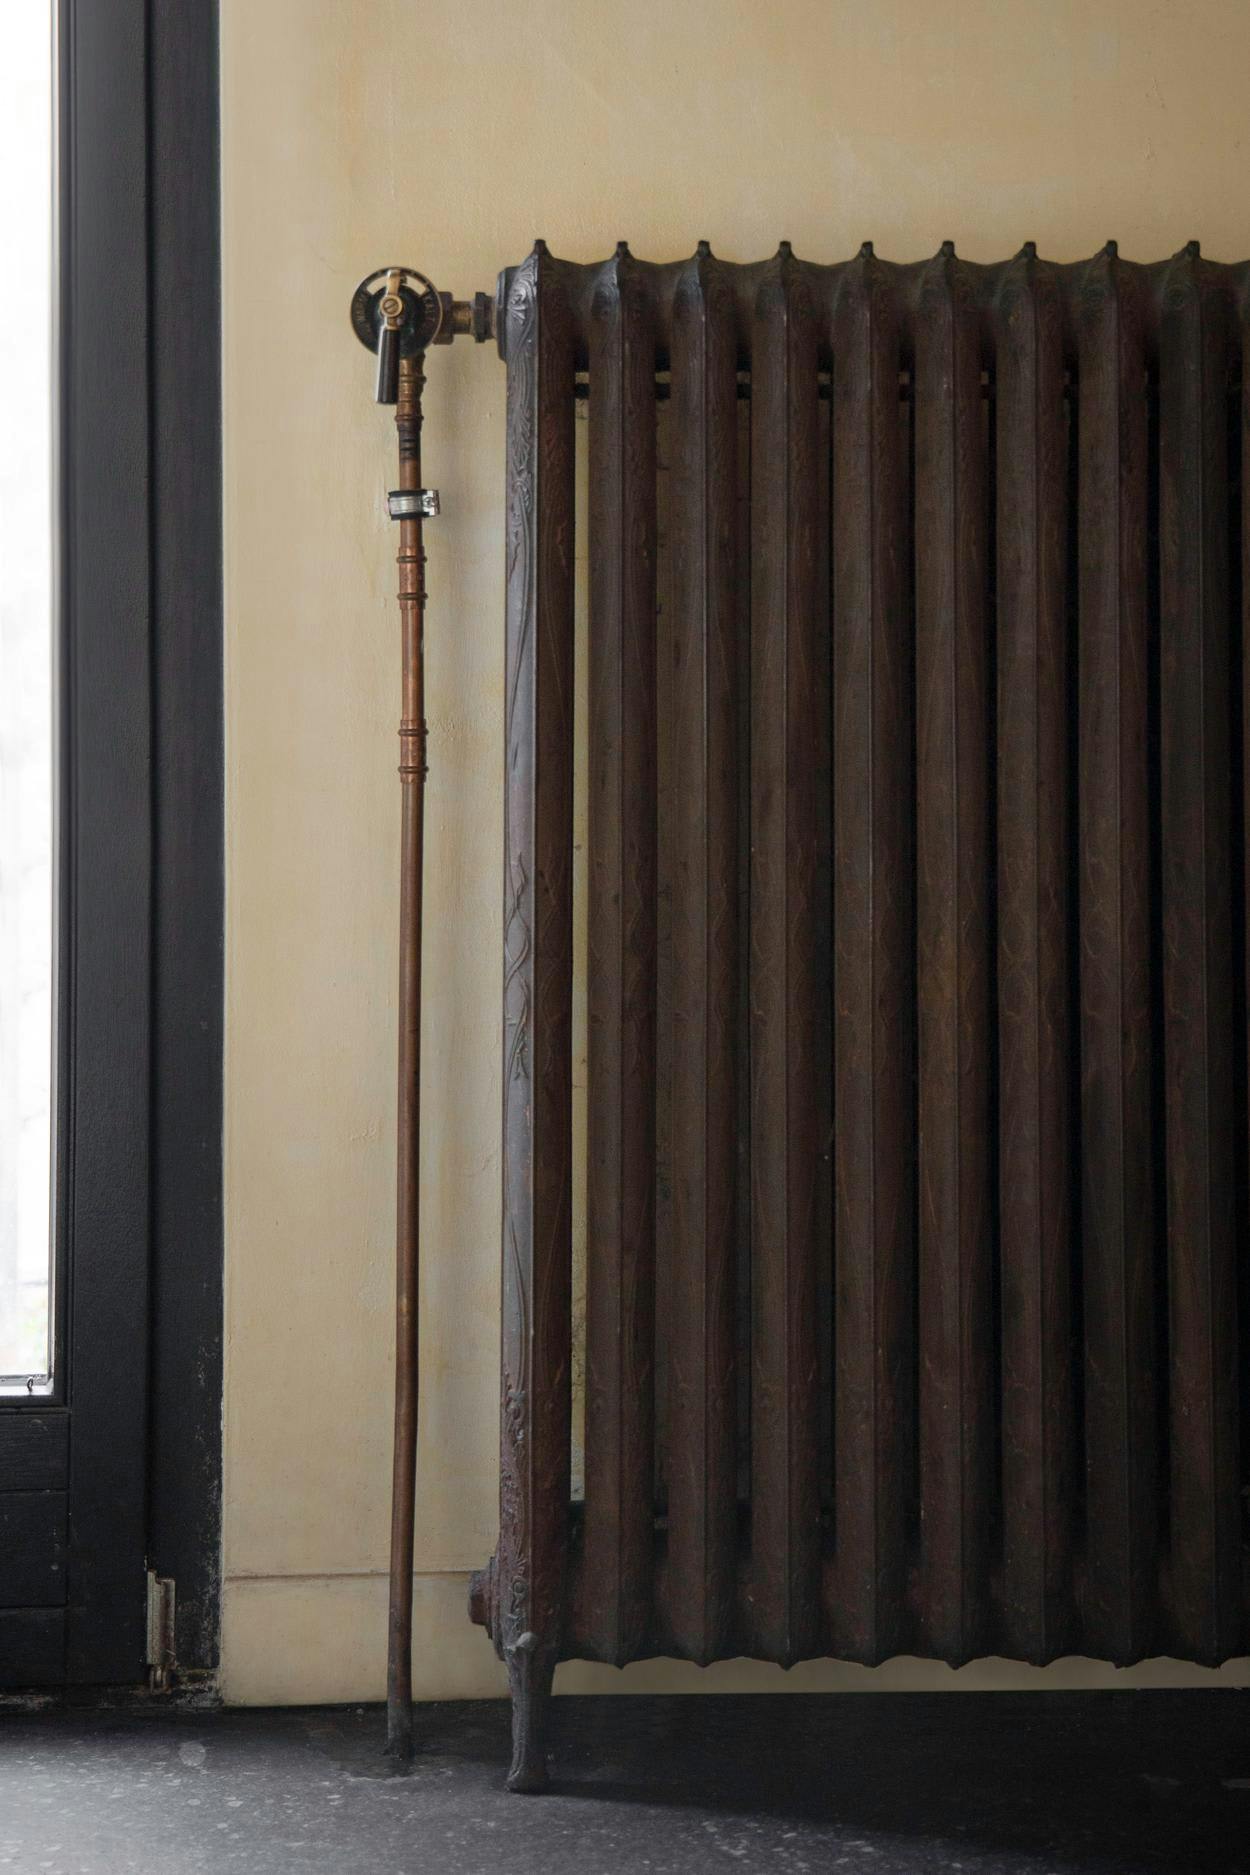 A large, old-fashioned radiator is mounted on a wall next to a window, with a metal pipe or pipe cover attached to it.